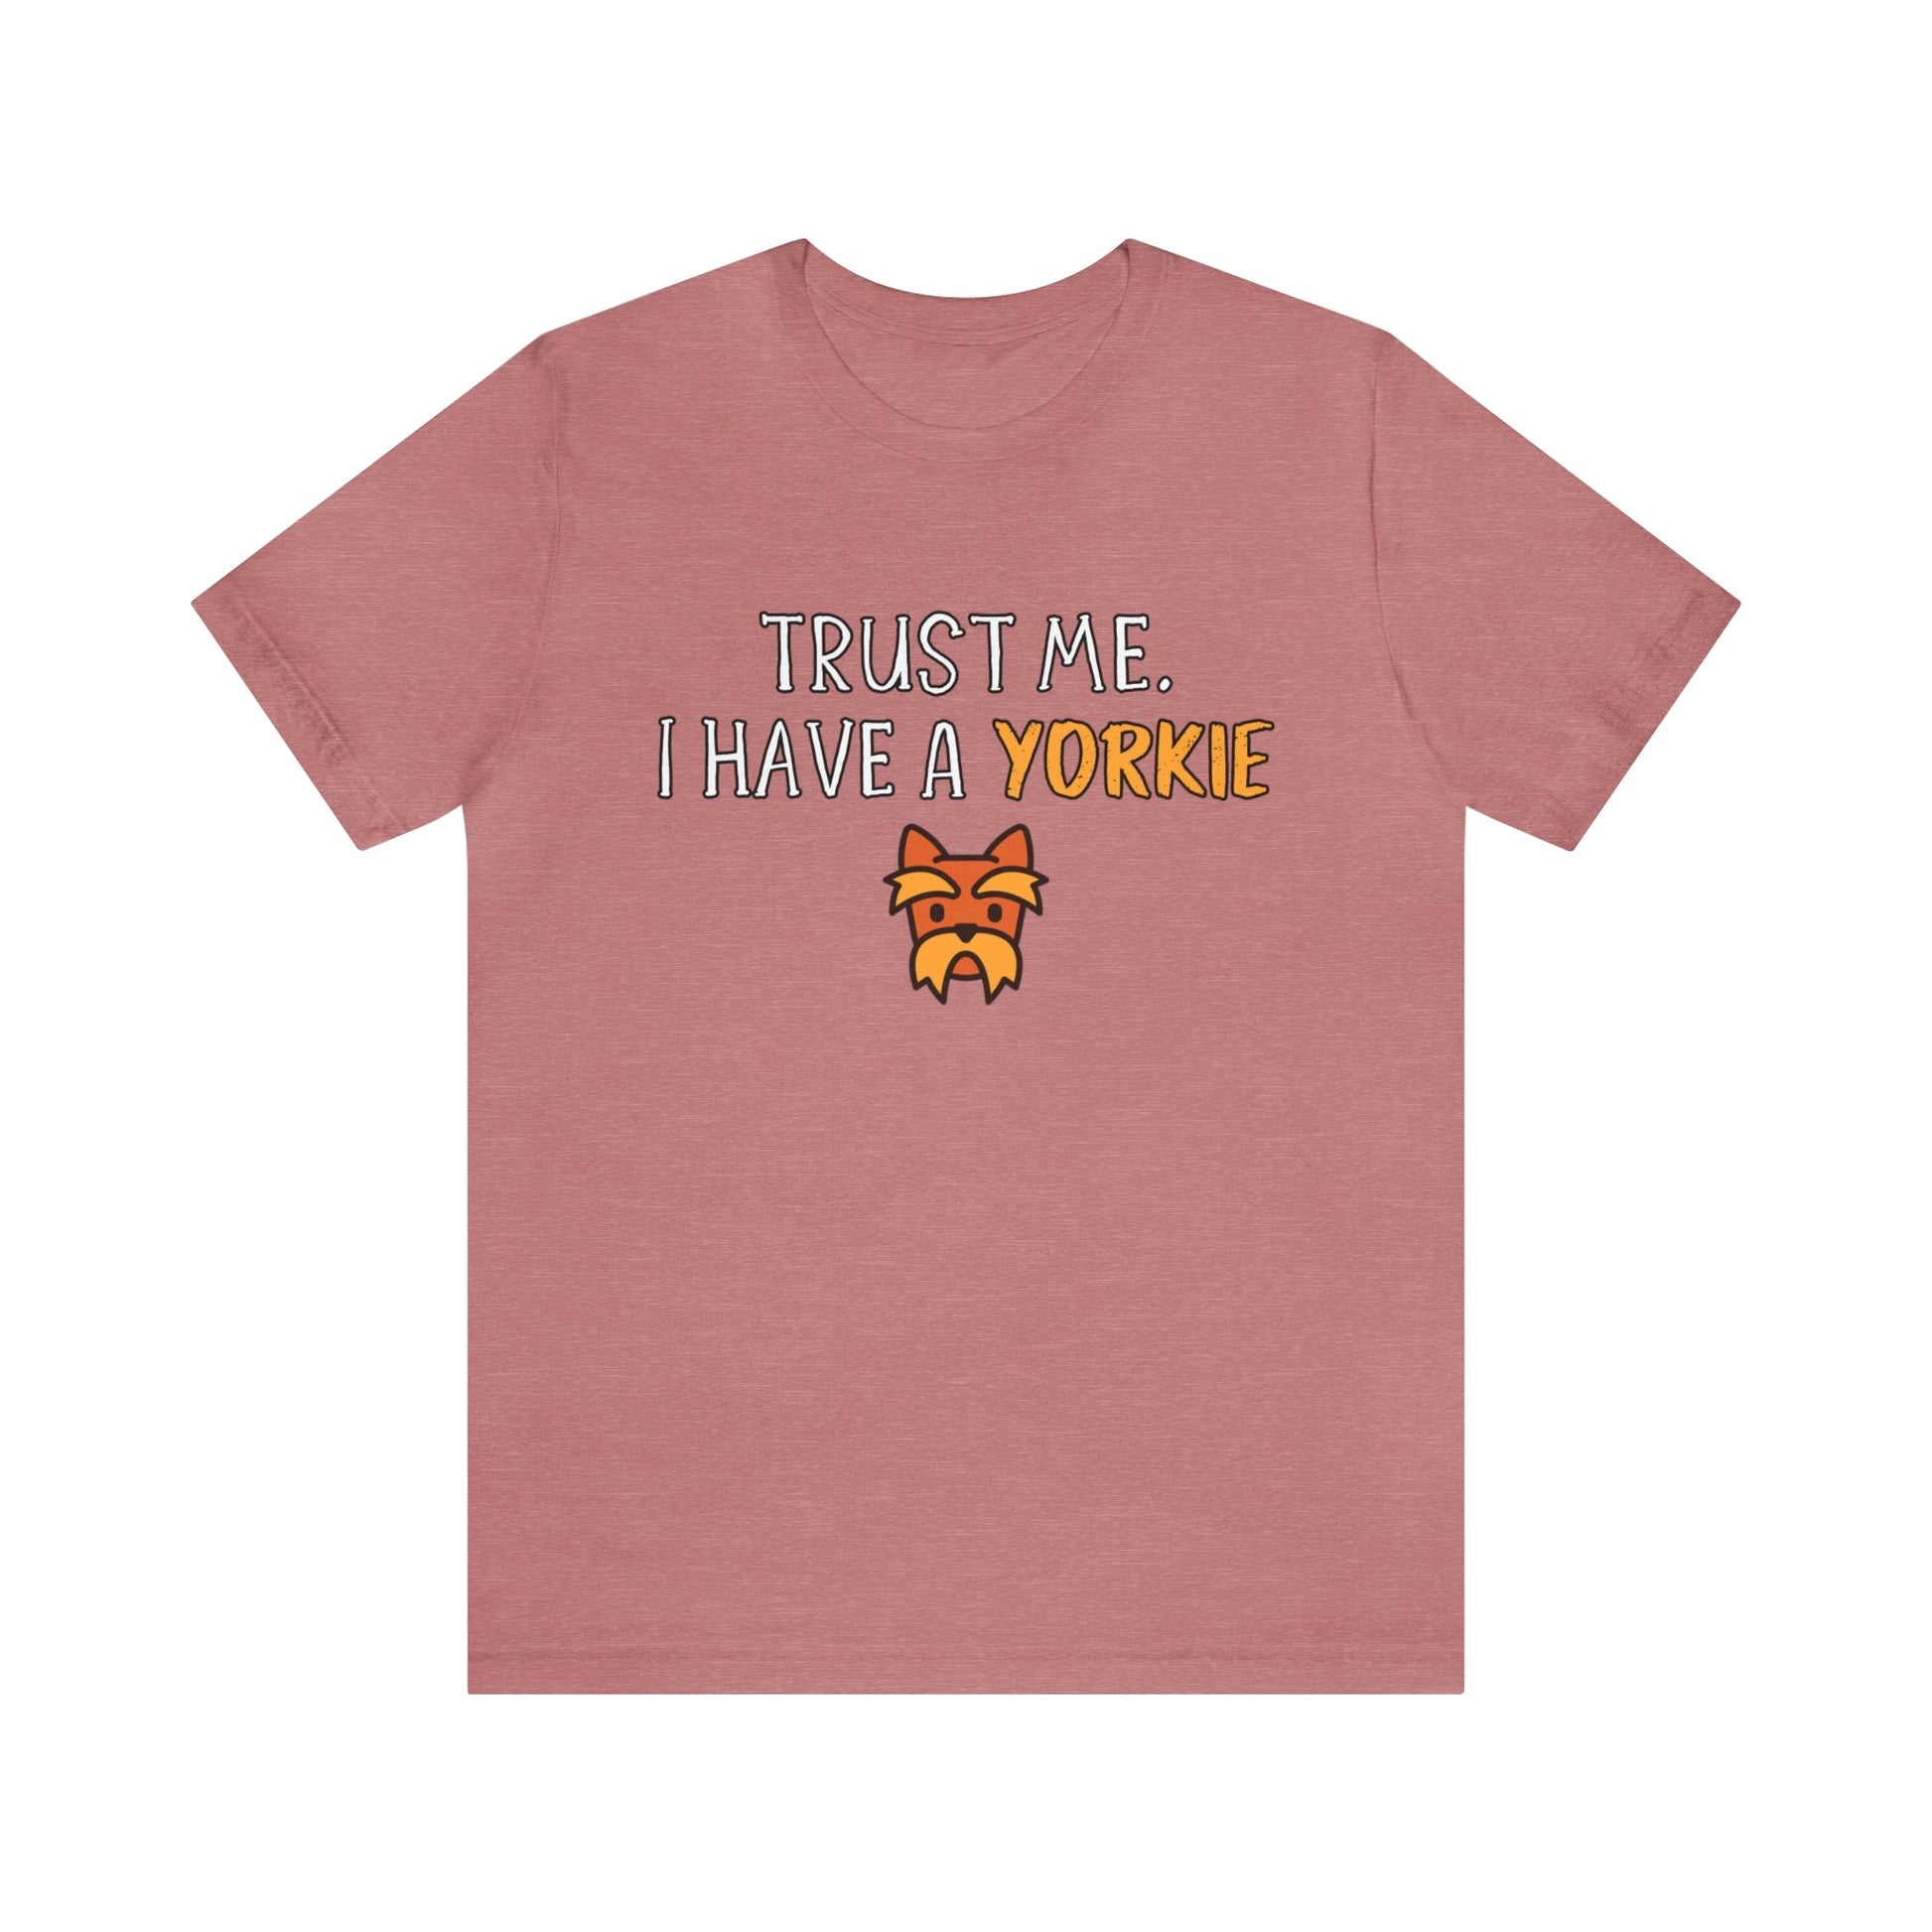 Yorkshire Terrier t shirt red